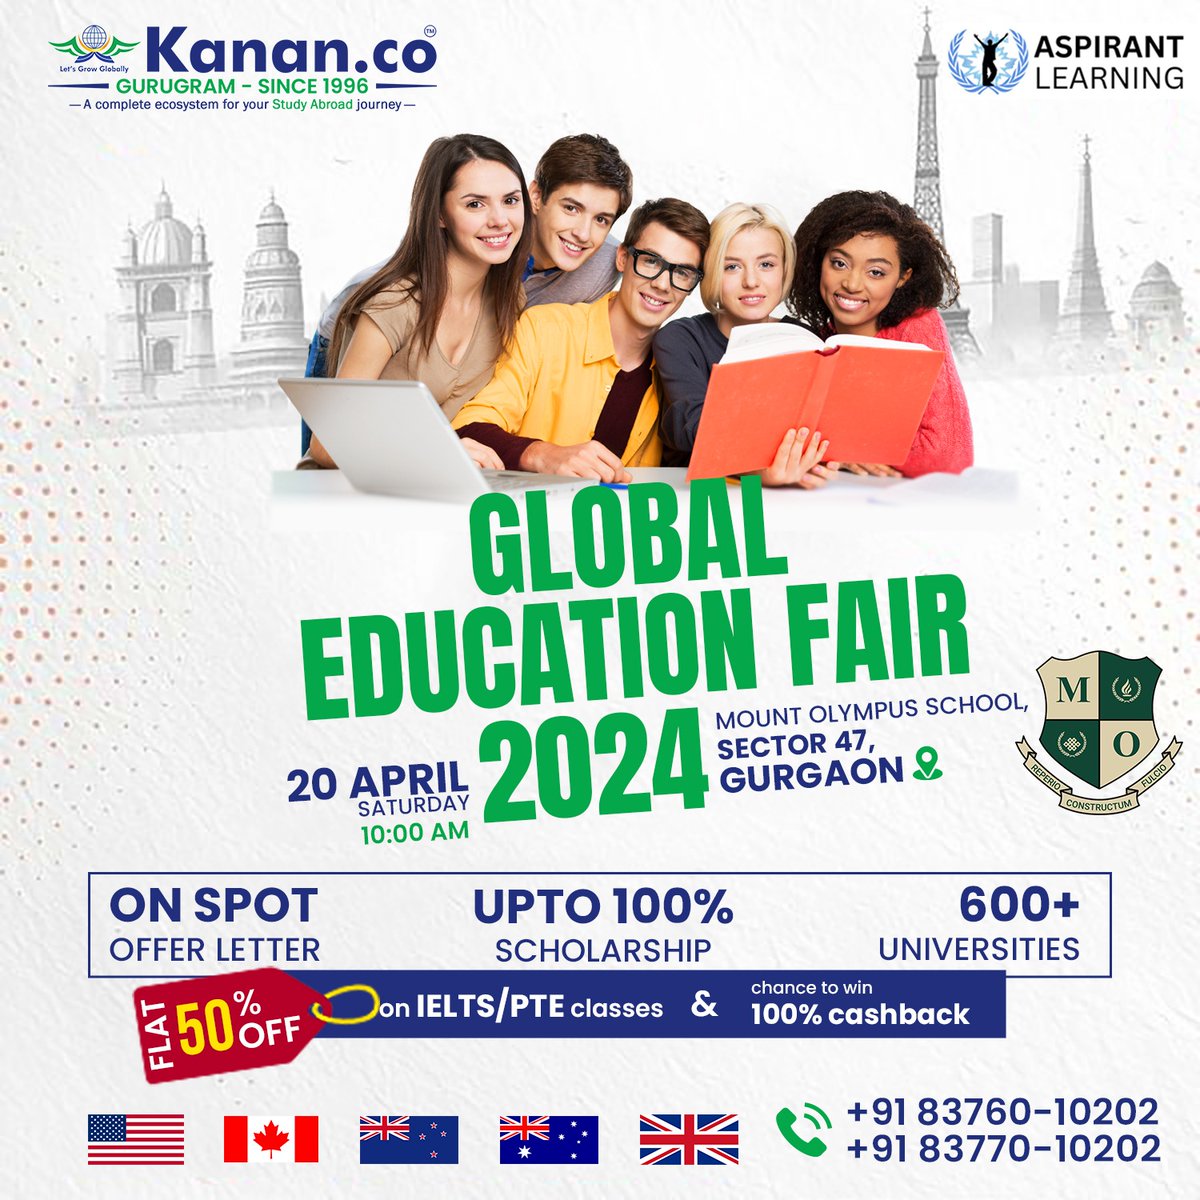 Embark on your journey to success with us at our exclusive Education Fair!

Register now through the link in our Bio!
linktr.ee/kanan.cogurugr…

#GlobalEdFair #GlobalEducation #globaleducationopportunities #canada #canadastudentvisa #studyoverseas #studyoverseasconsultants